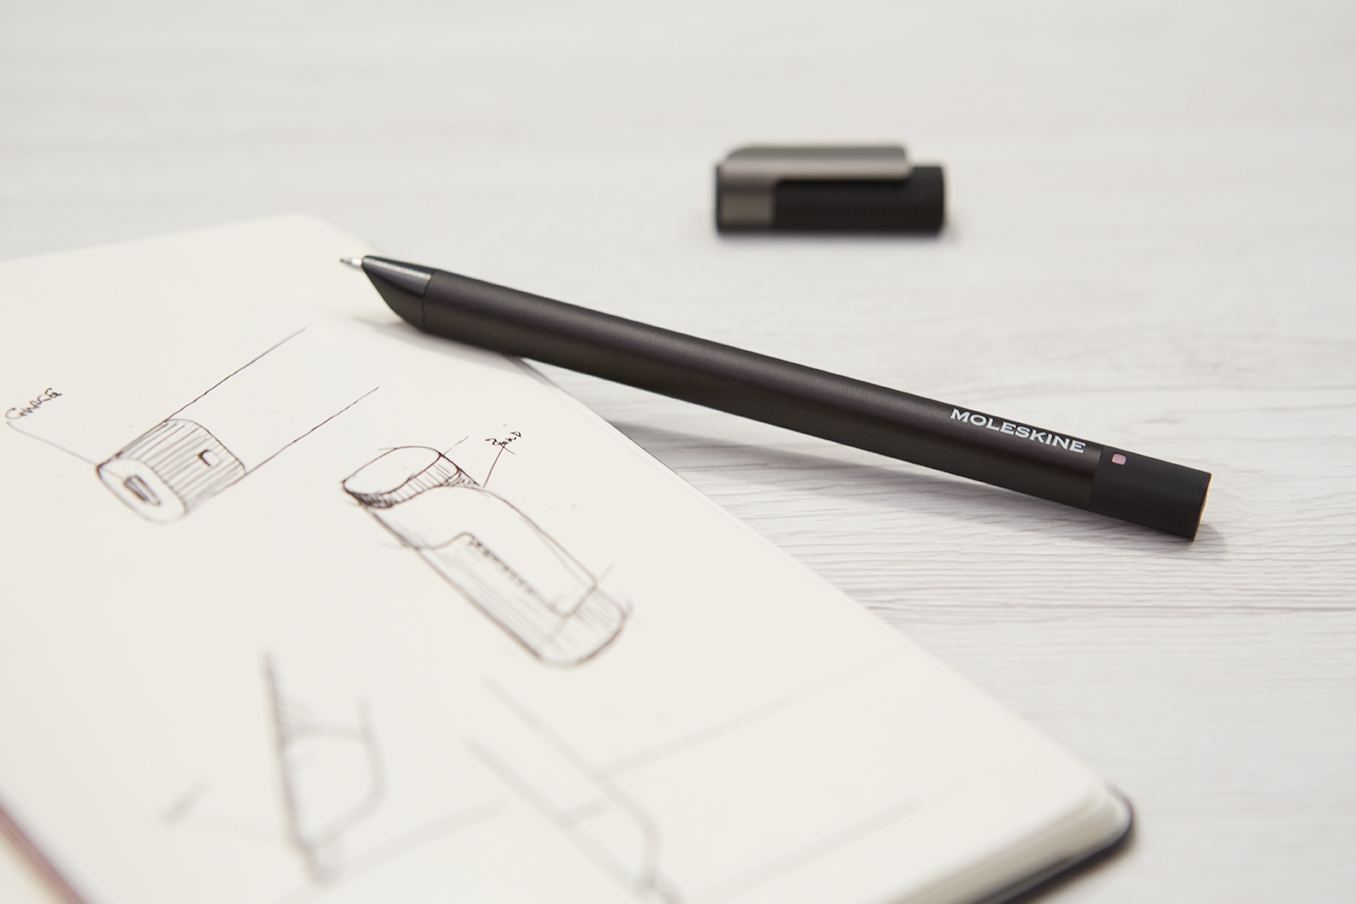 Moleskine’s latest smart pen saves your writing to download later | DeviceDaily.com